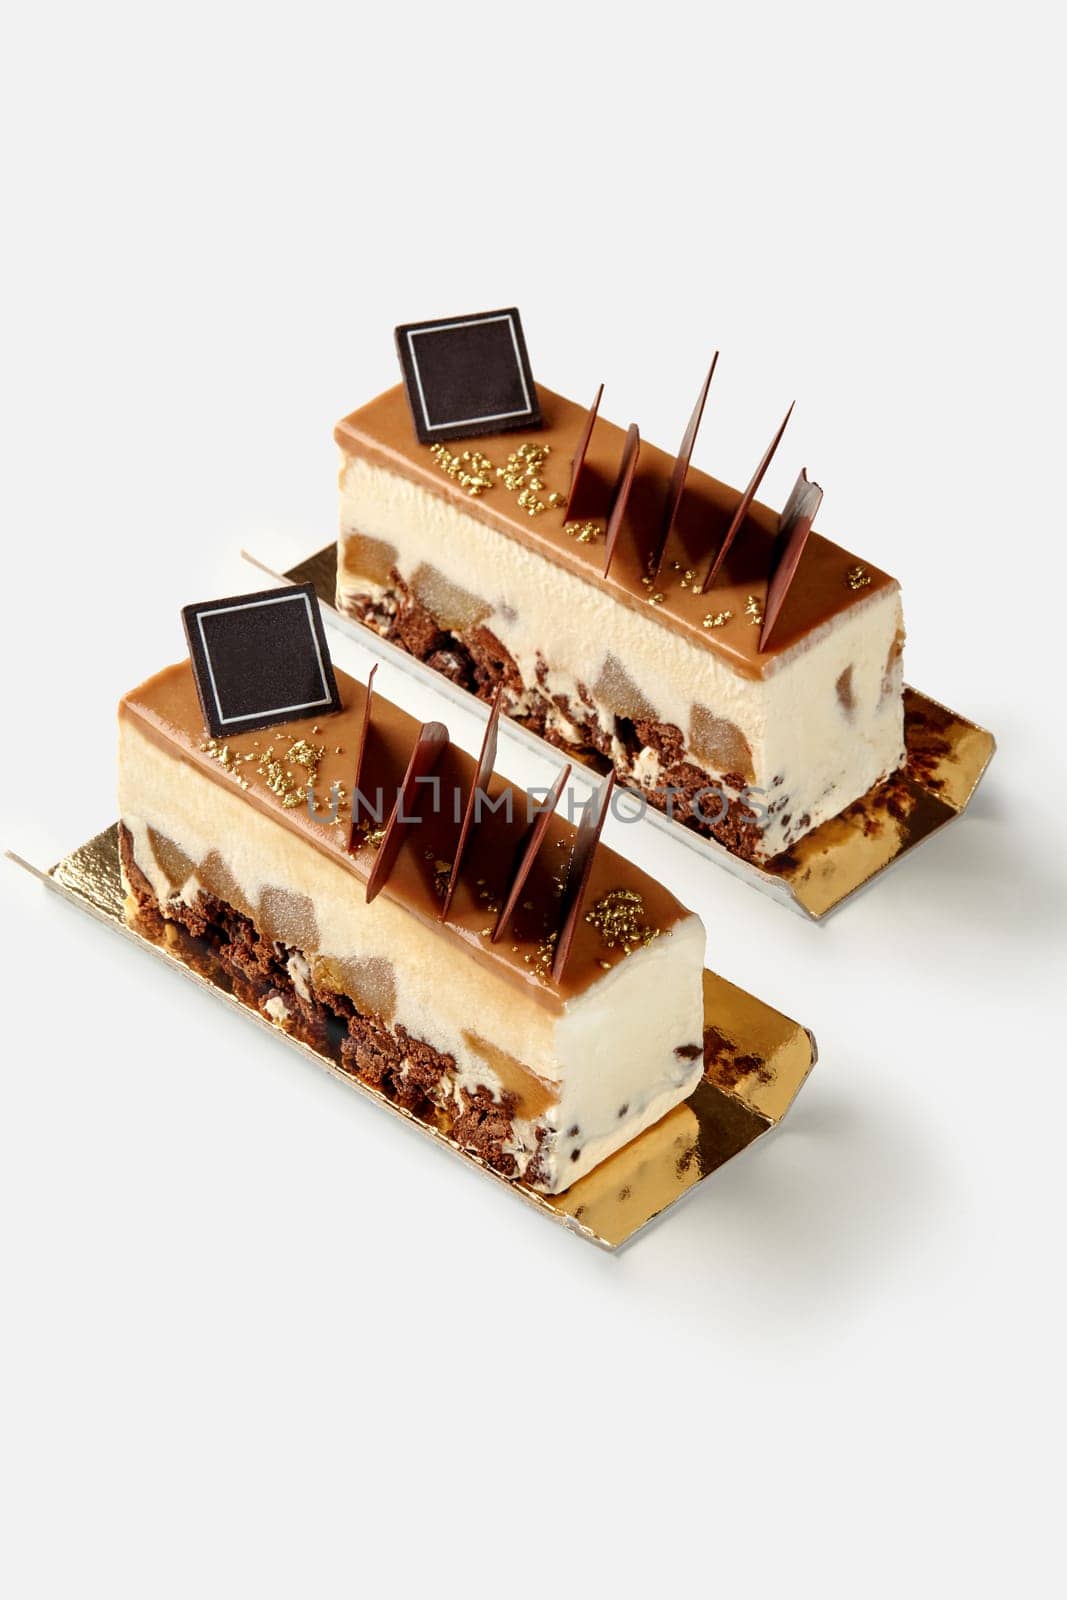 Two appetizing creamy mousse desserts with crunchy streusel, pieces of spiced poached pears and soft caramel topping decorated with dark chocolate flakes and golden sugar sprinkles, isolated on white